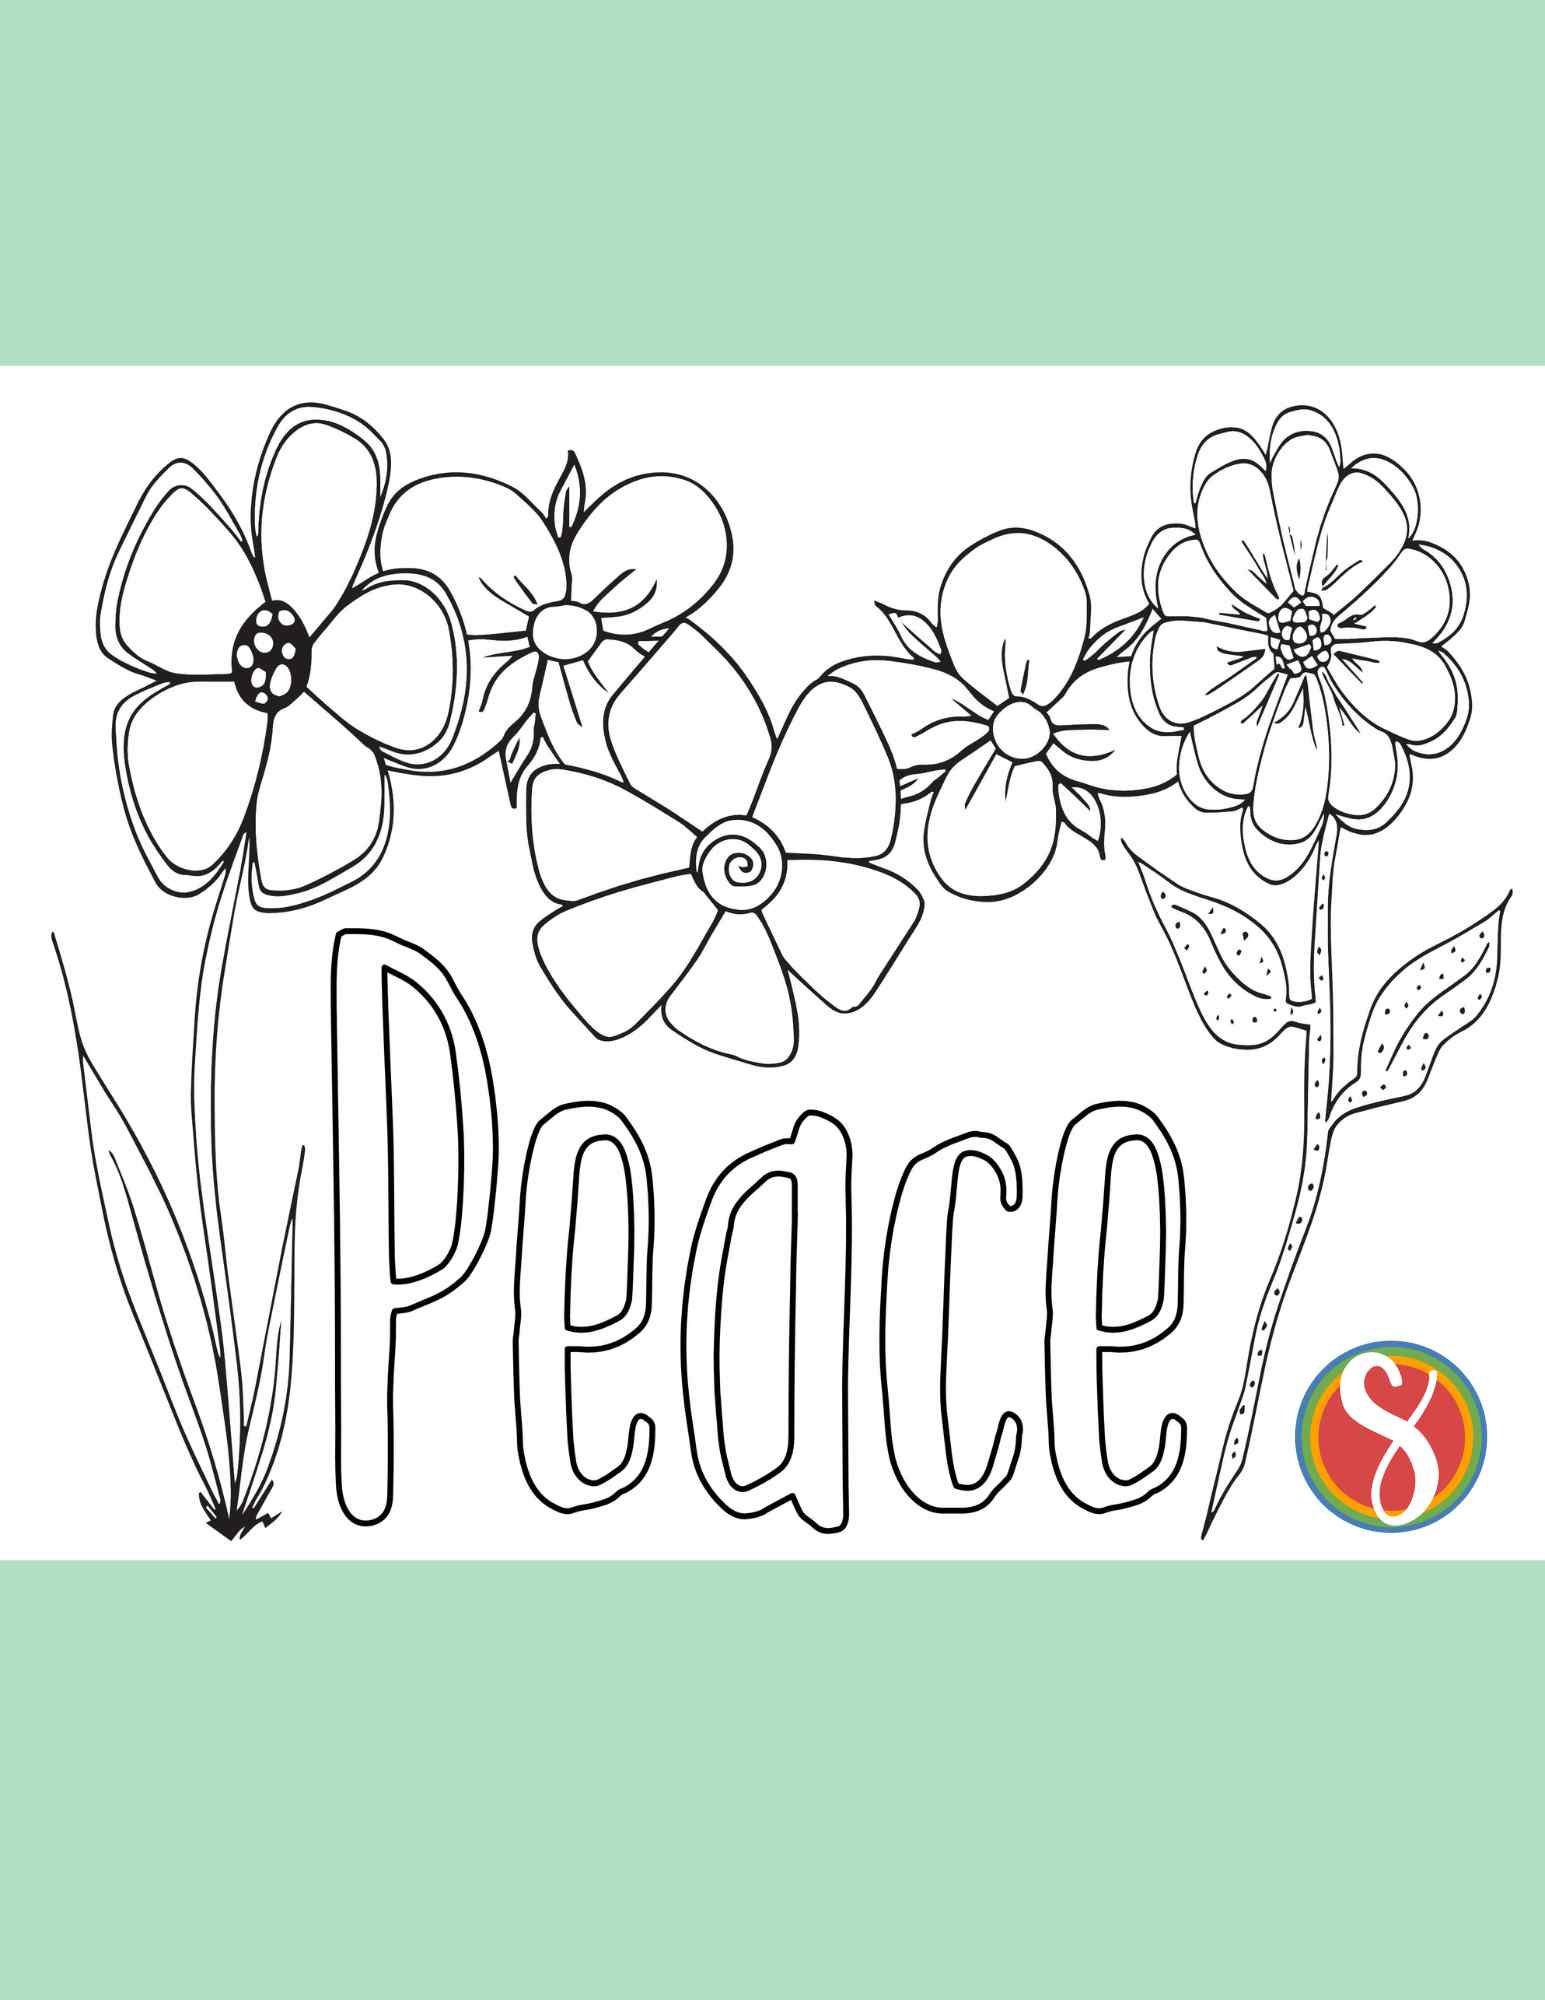 peace coloring page with peace in bubble letters and long stemmed flowers to color